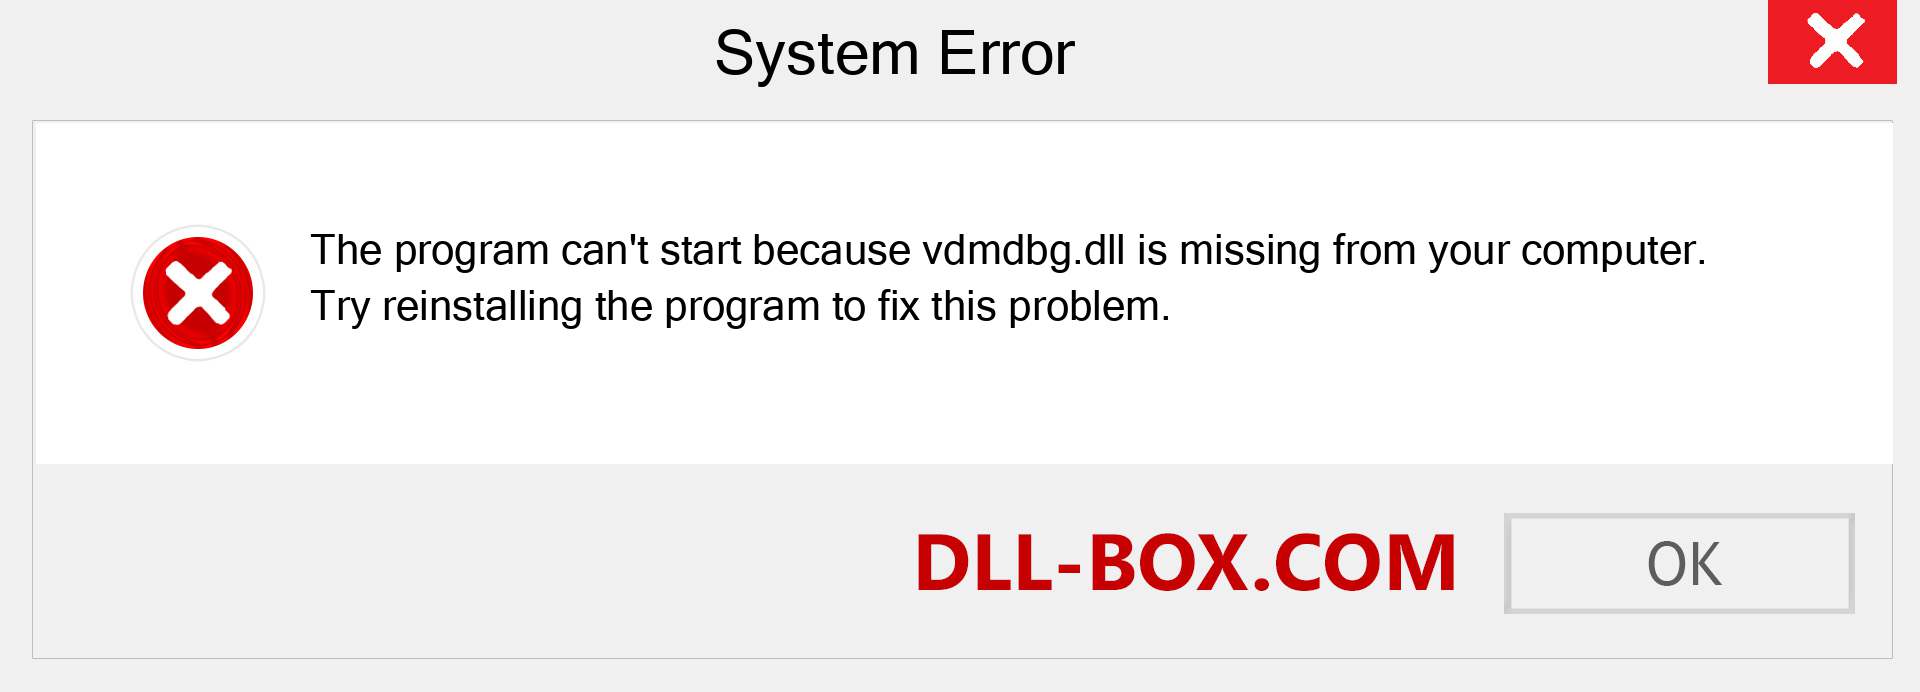  vdmdbg.dll file is missing?. Download for Windows 7, 8, 10 - Fix  vdmdbg dll Missing Error on Windows, photos, images